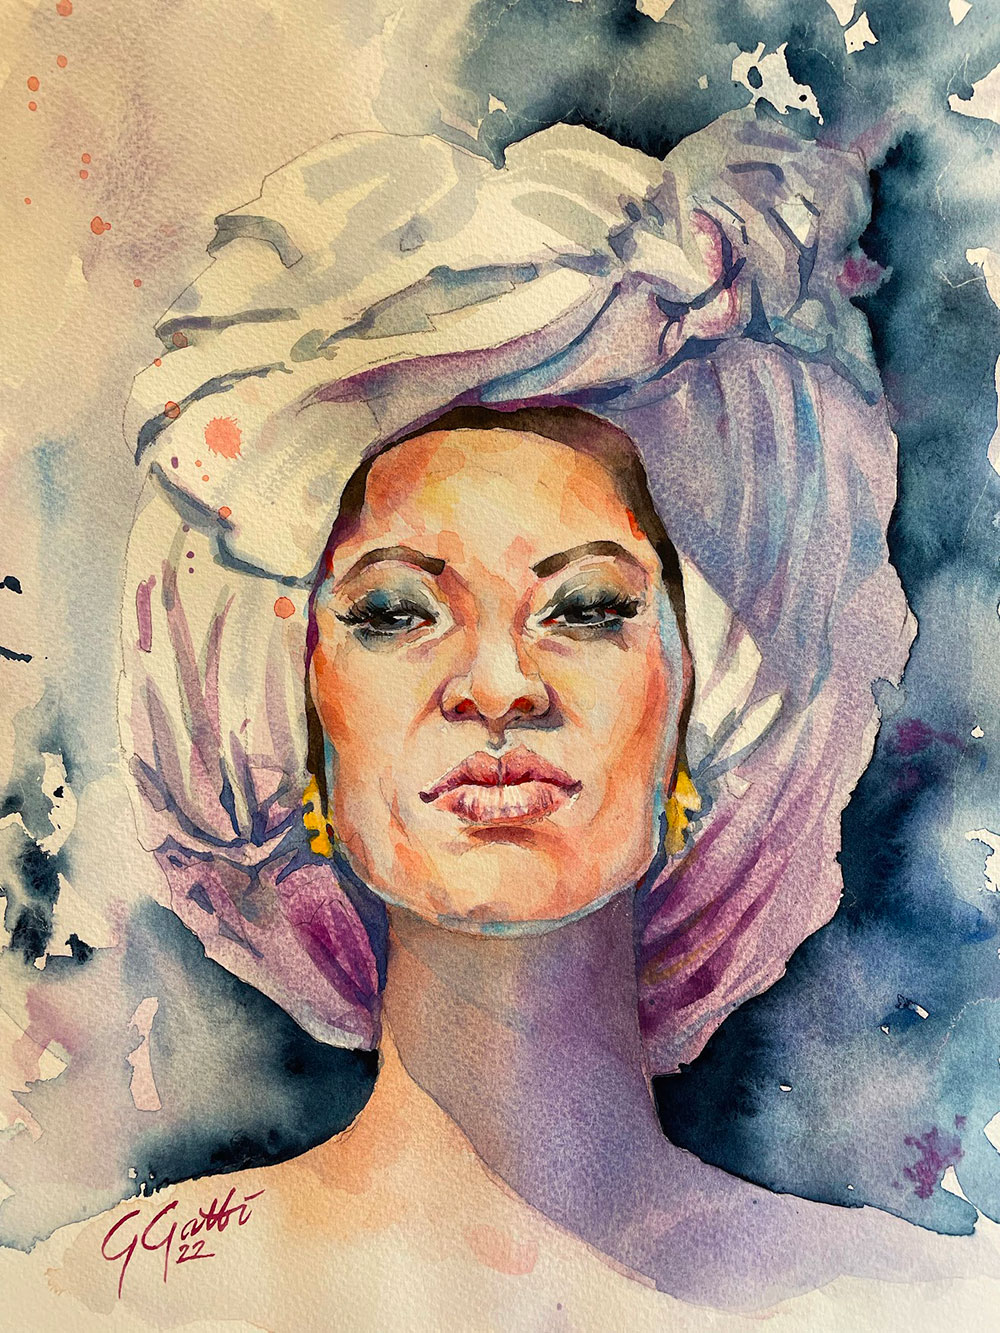 Woman with turban - watercolour on paper
40x30 cm